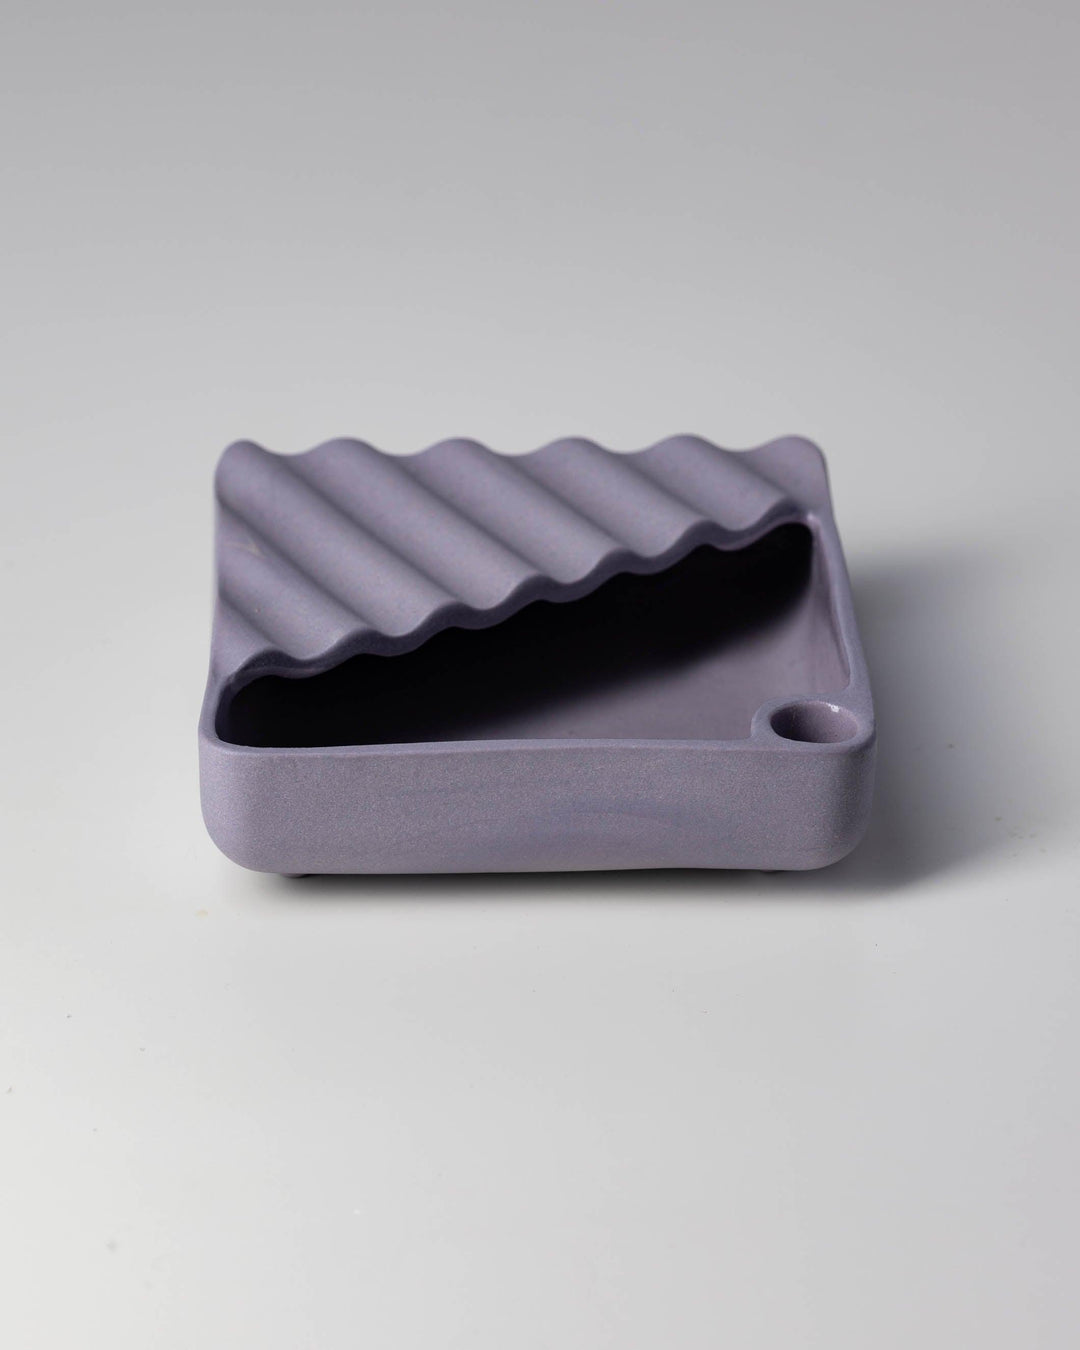 Lavender ceramic ashtray with wavy design on a grey background.